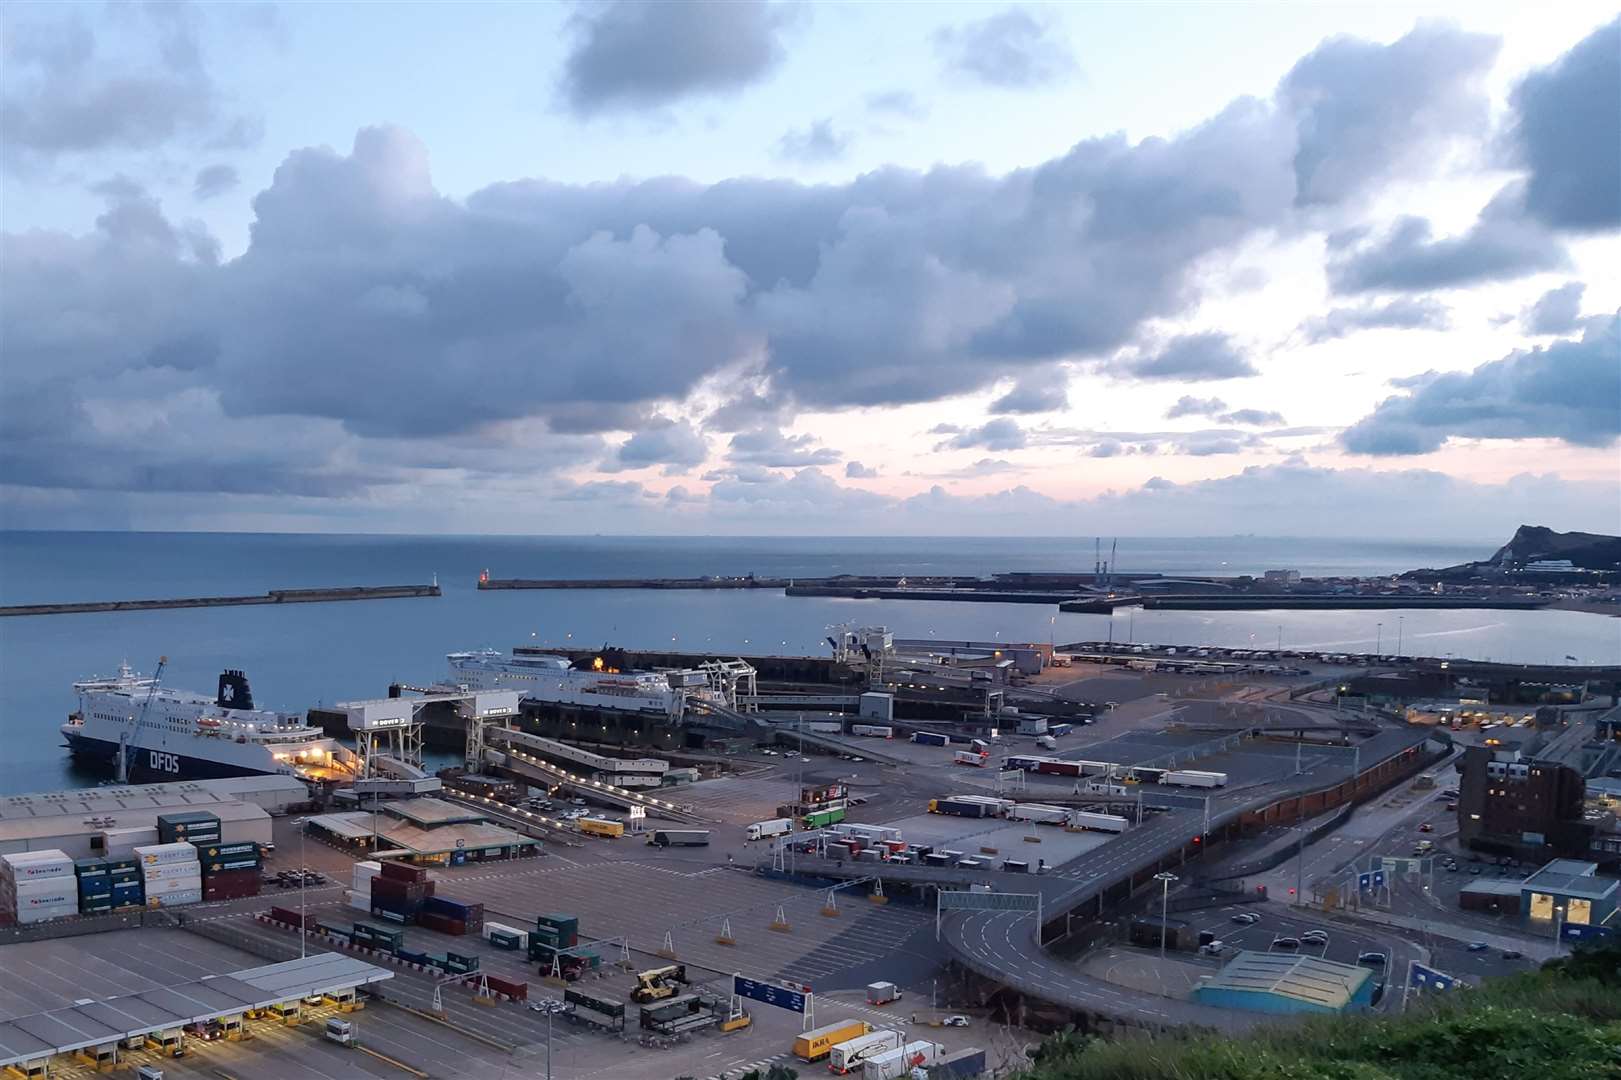 Police were called to the Port of Dover this morning